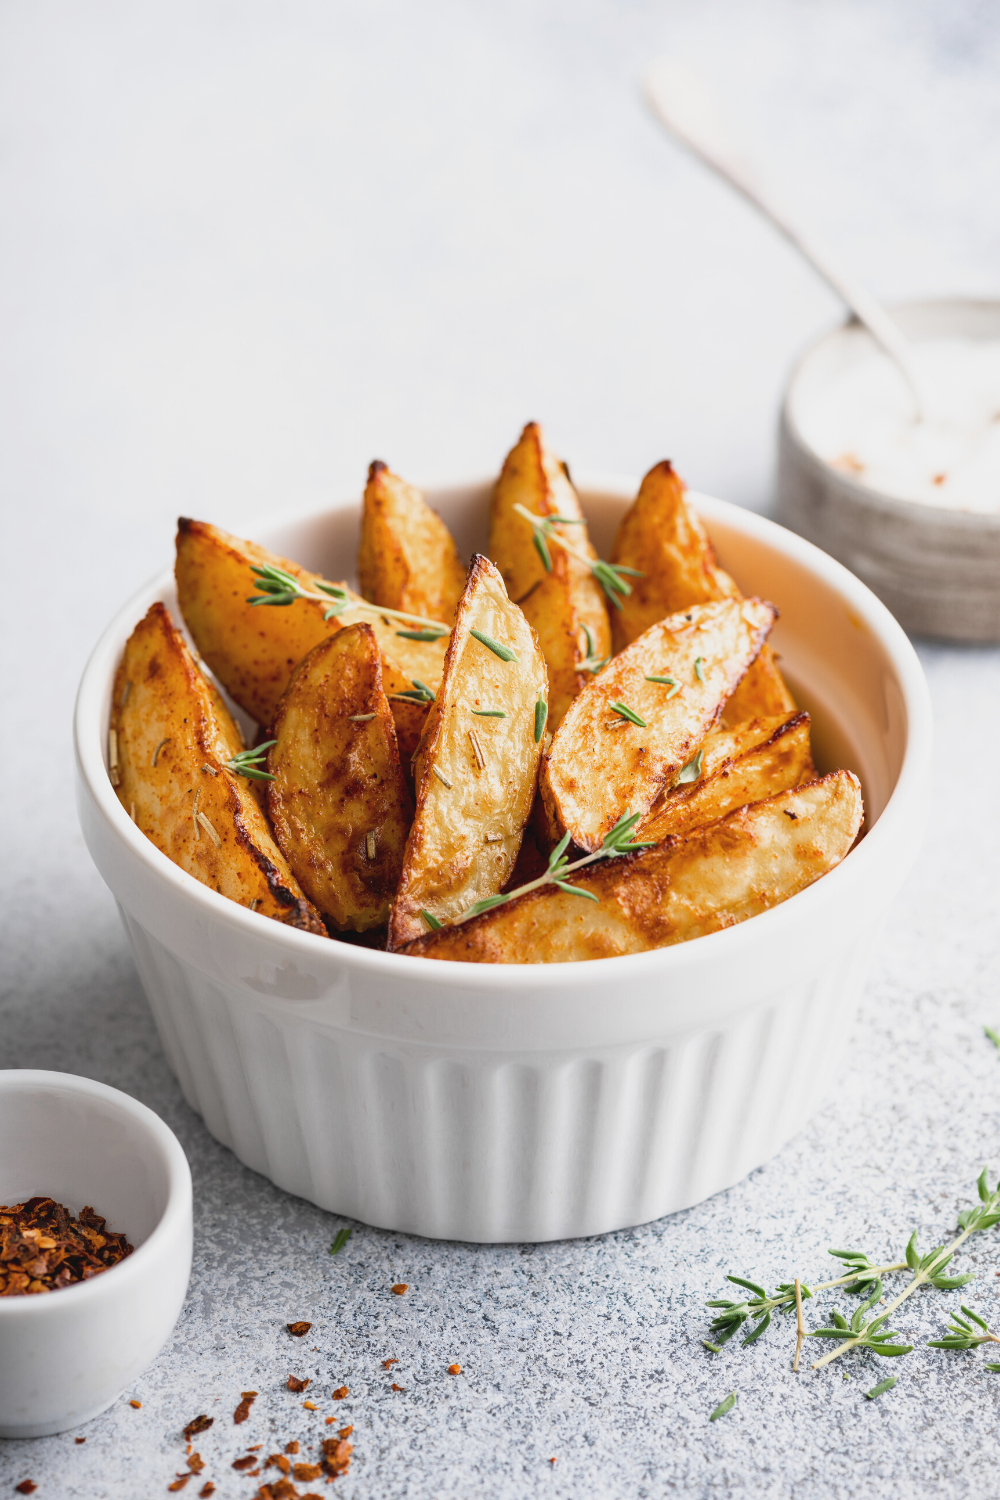 Oven Baked Potato Wedges in 6 Steps